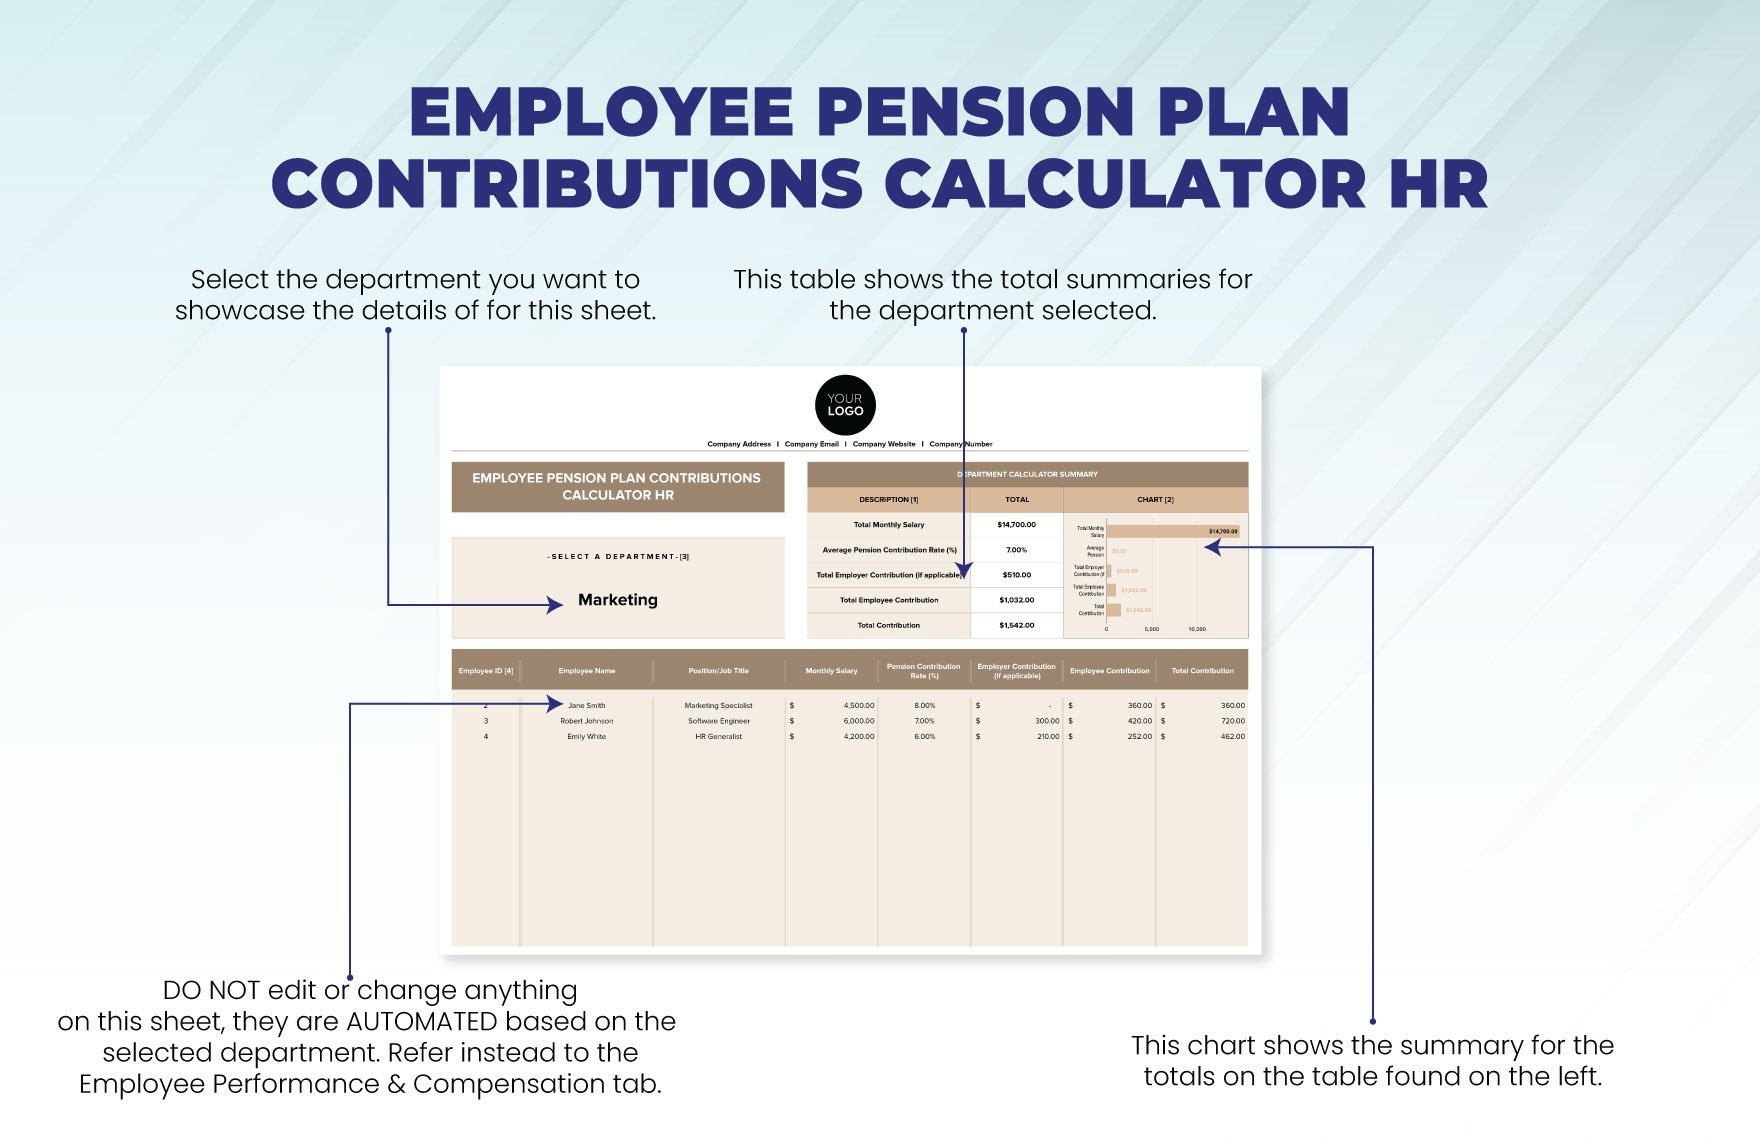 Employee Pension Plan Contributions Calculator HR Template